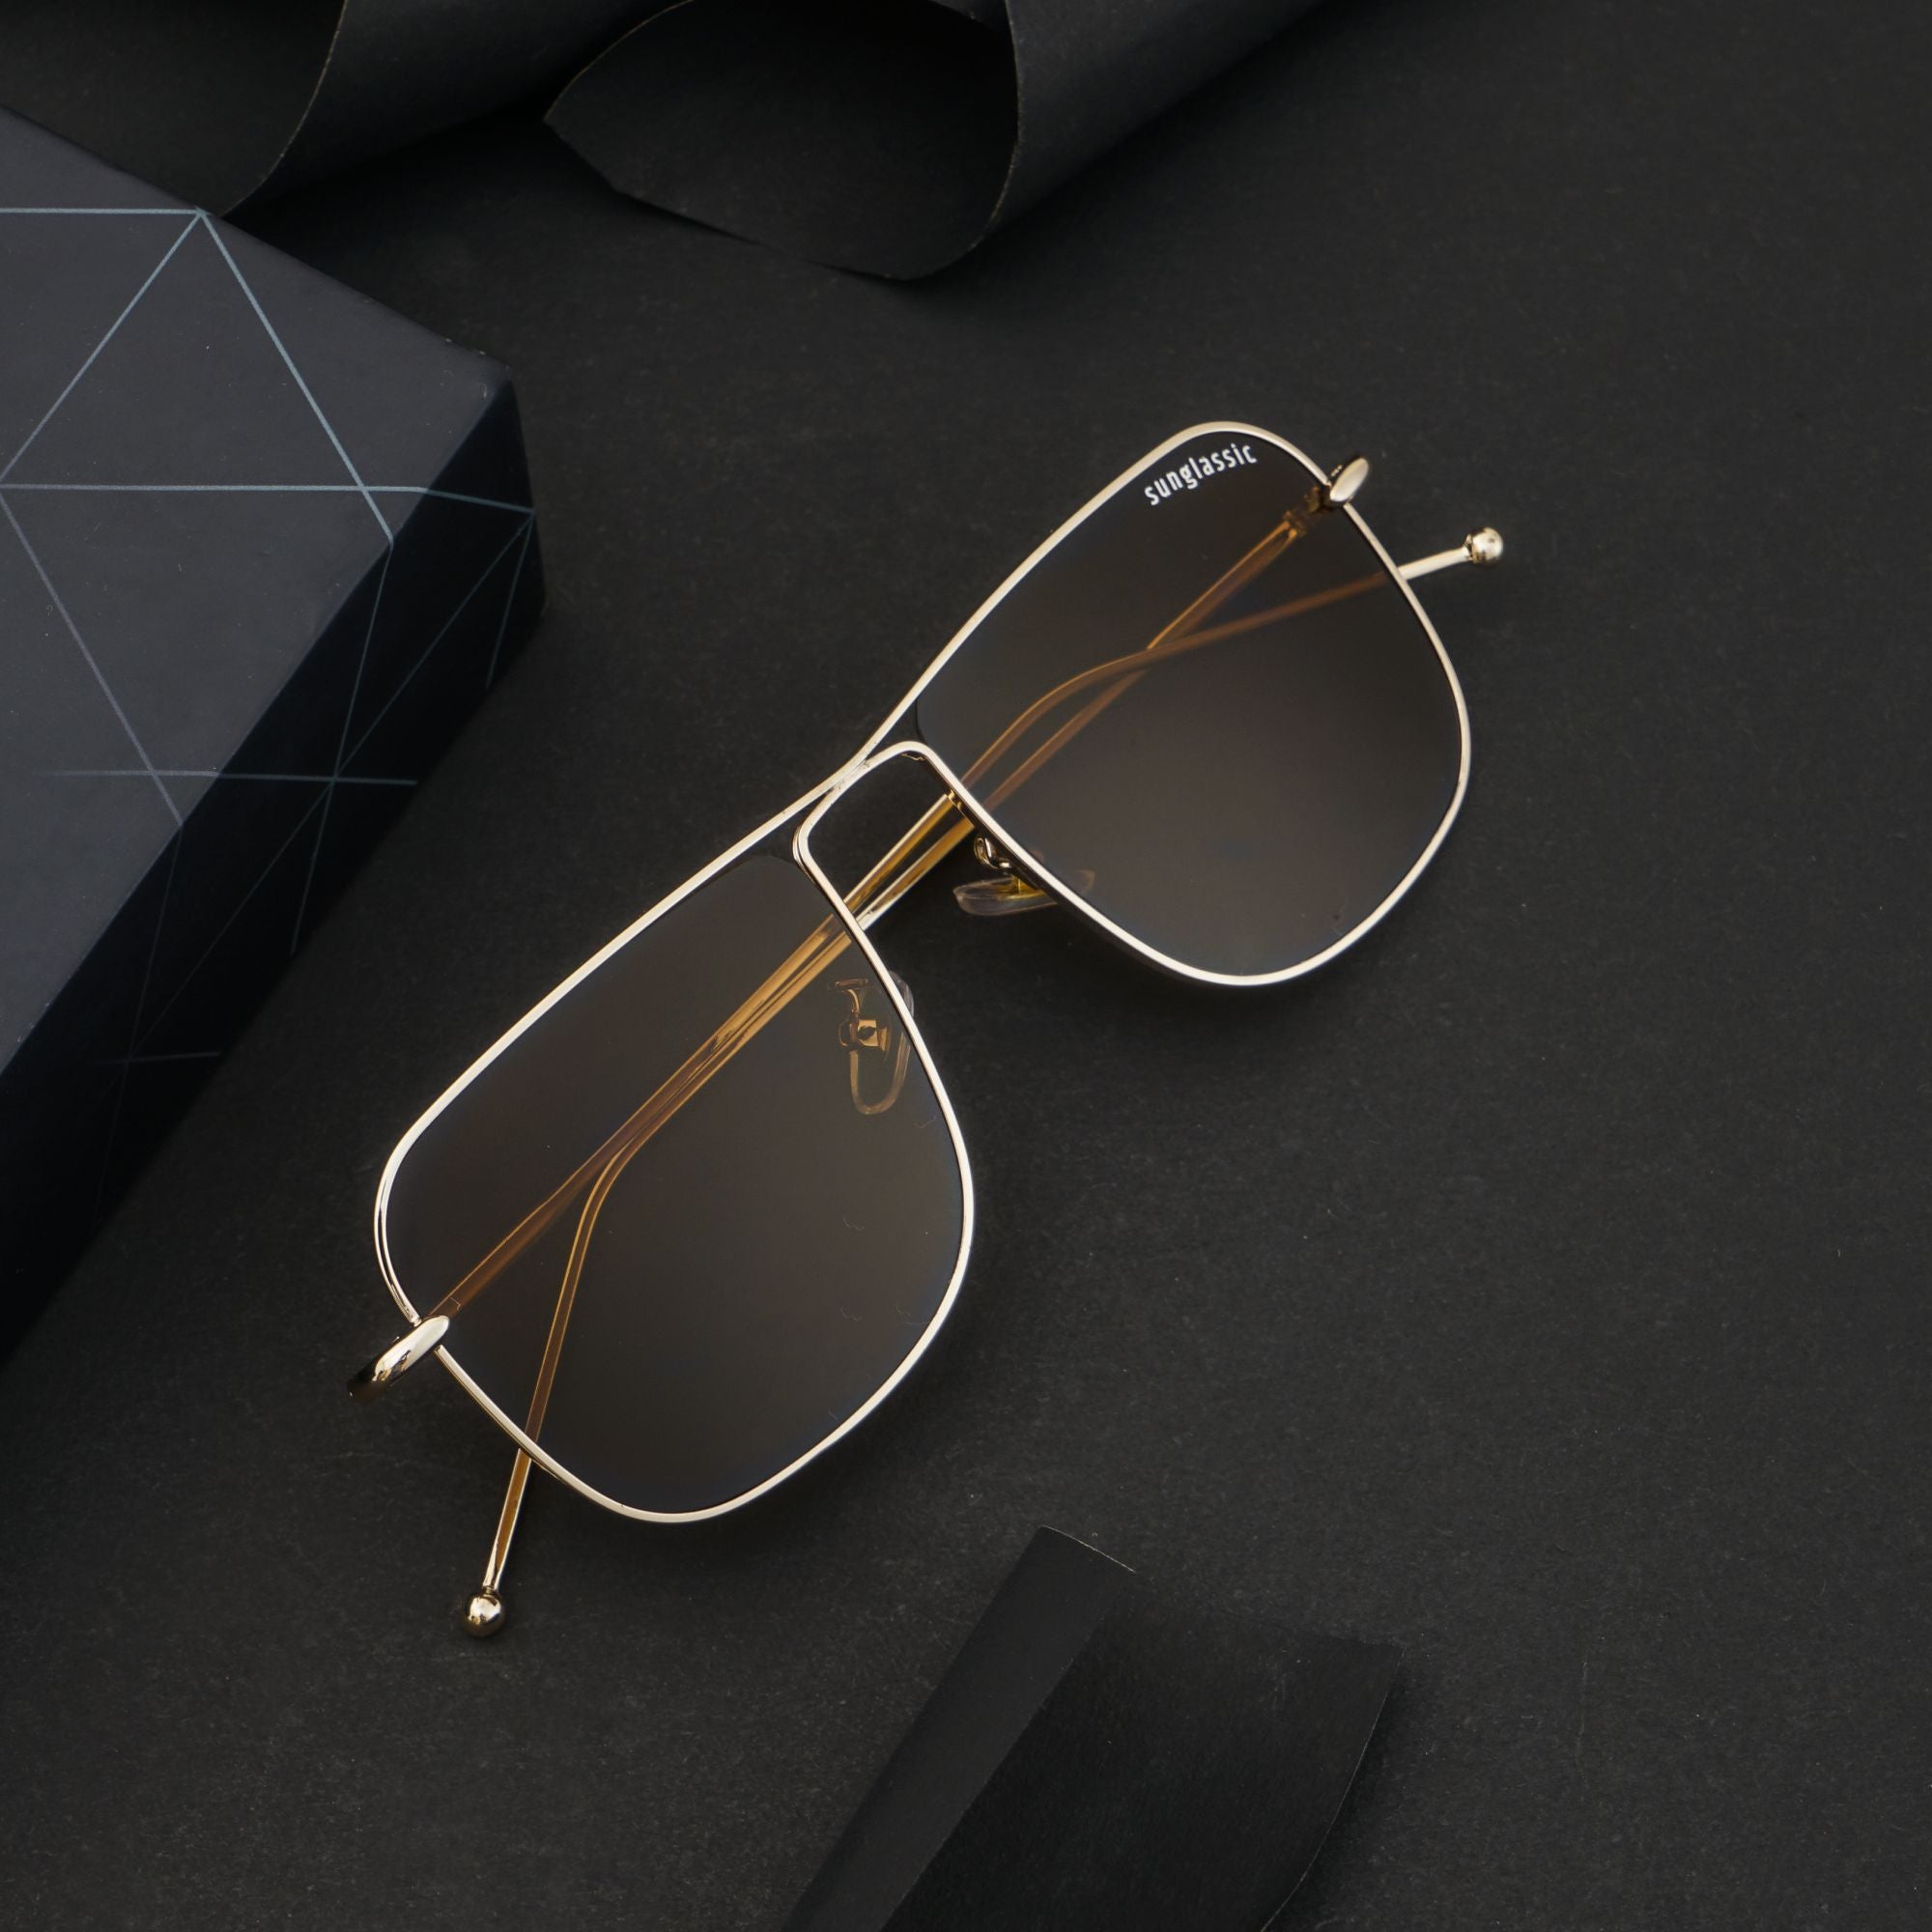 The Godfather Gold Brown Square Sunglasses